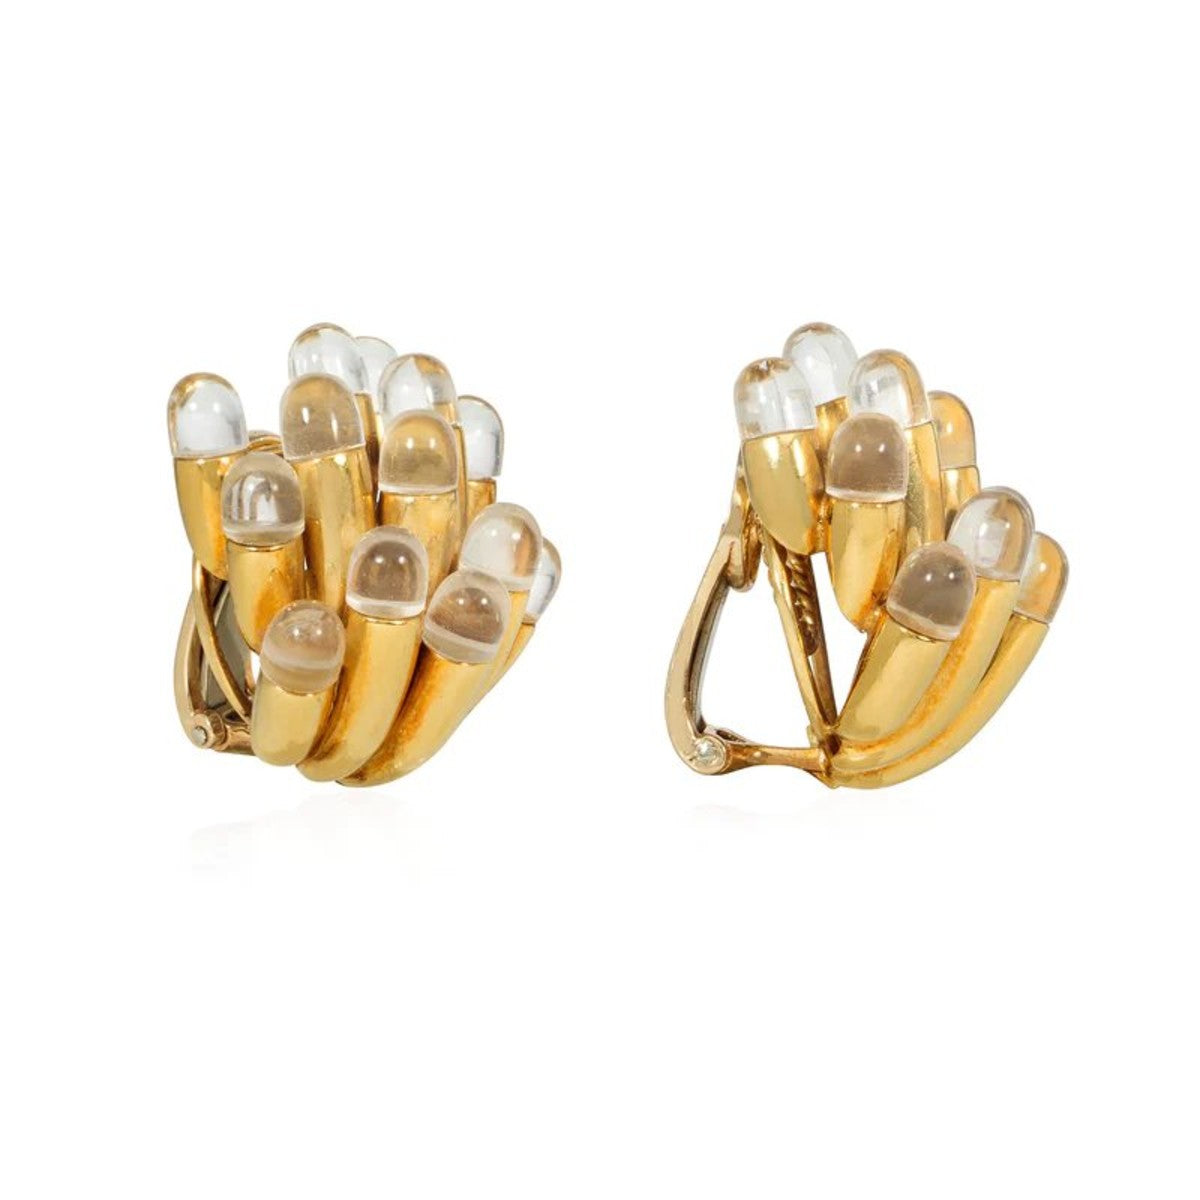 Aldo Cipullo 1970s 18KT Yellow Gold Rock Crystal Sea Anemones Earrings front and side